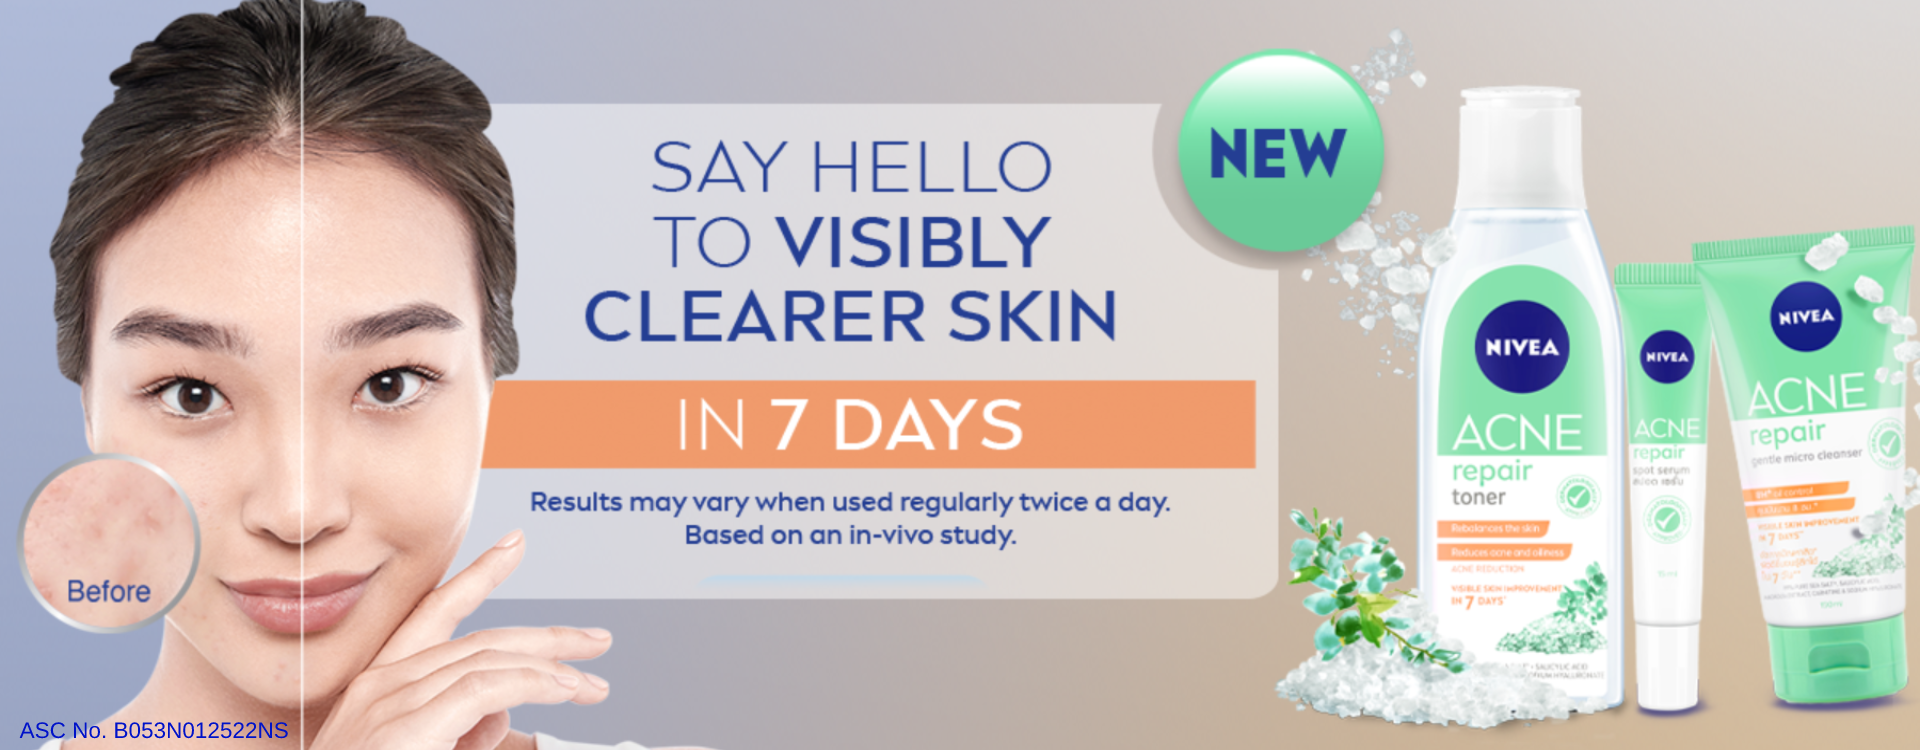 Get Visibly Clearer Skin in 7 days with NEW NIVEA Acne Repair